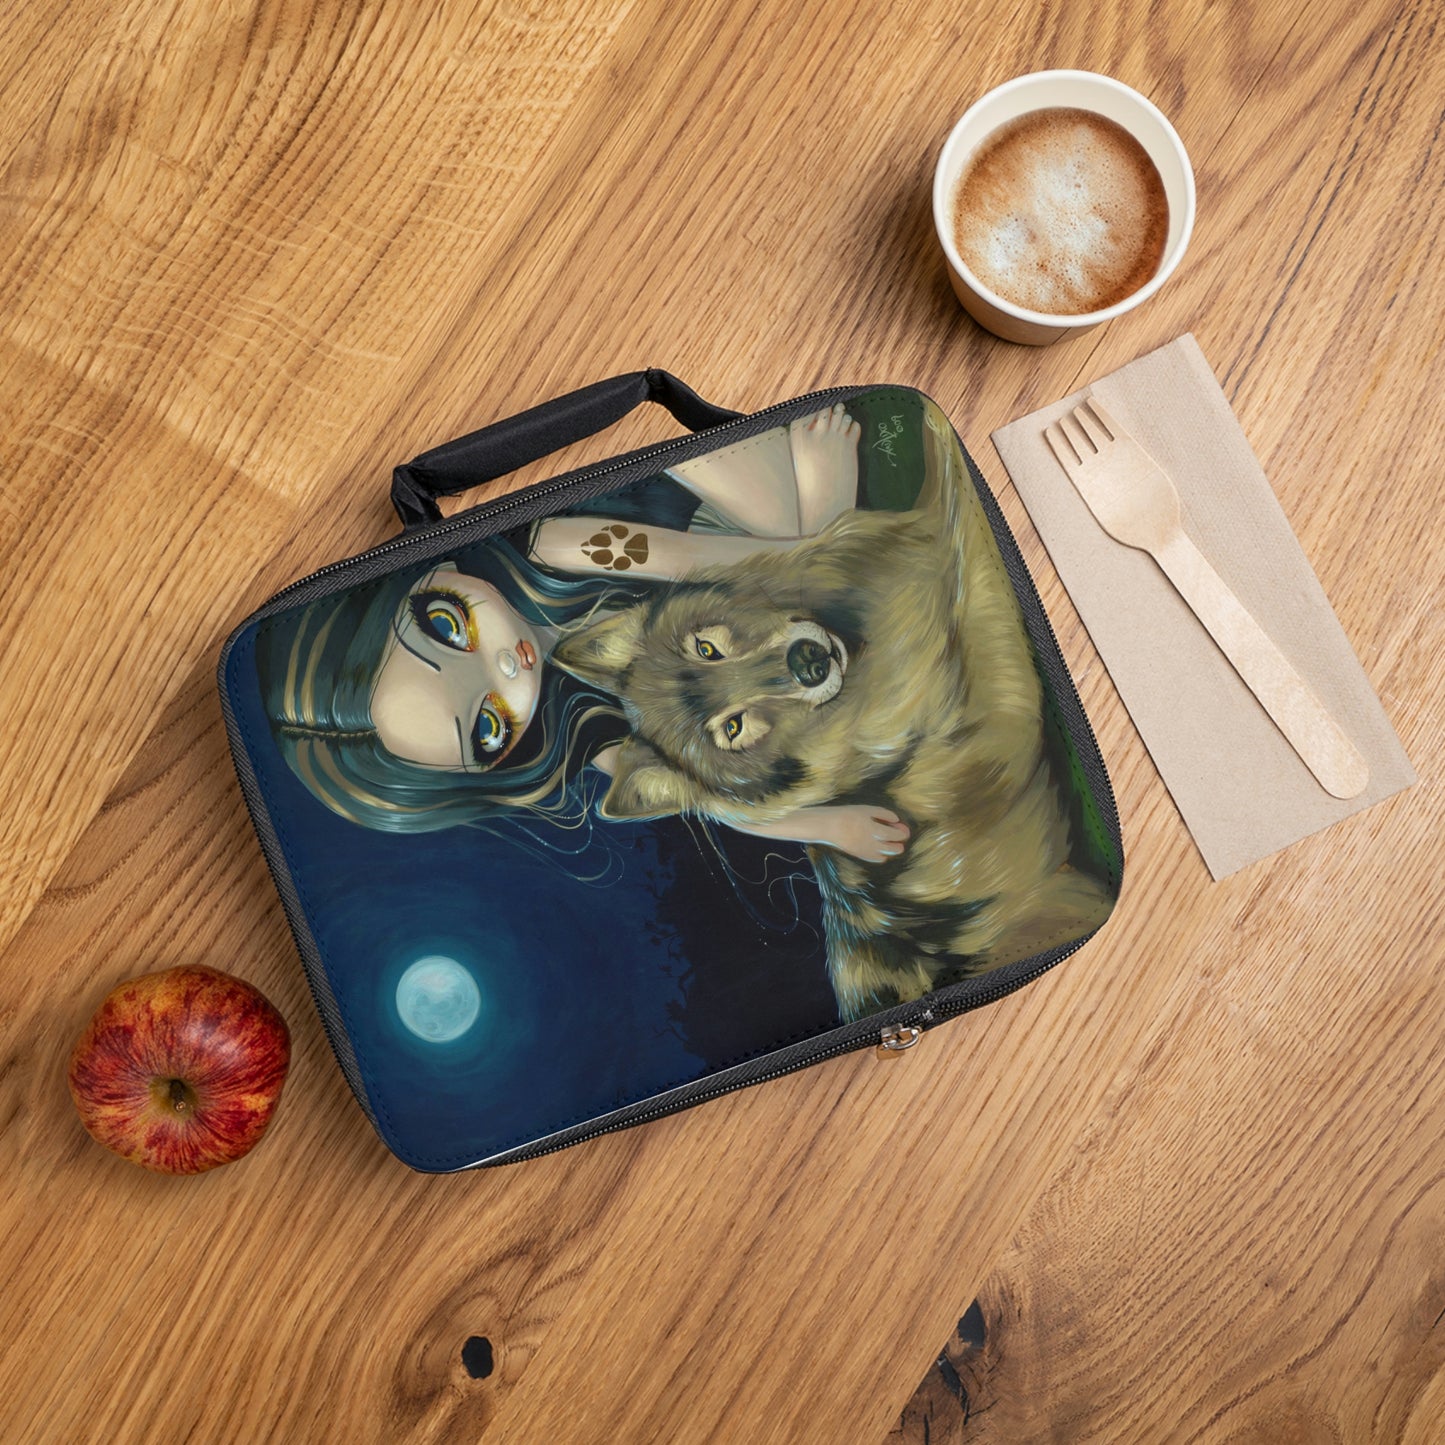 Wolf Moon Lunch Bag  | Lunch Box for Adults | Fairycore Lunch Box | Fairy Lunch Bag | Witchy Lunch Box | Faeriecore